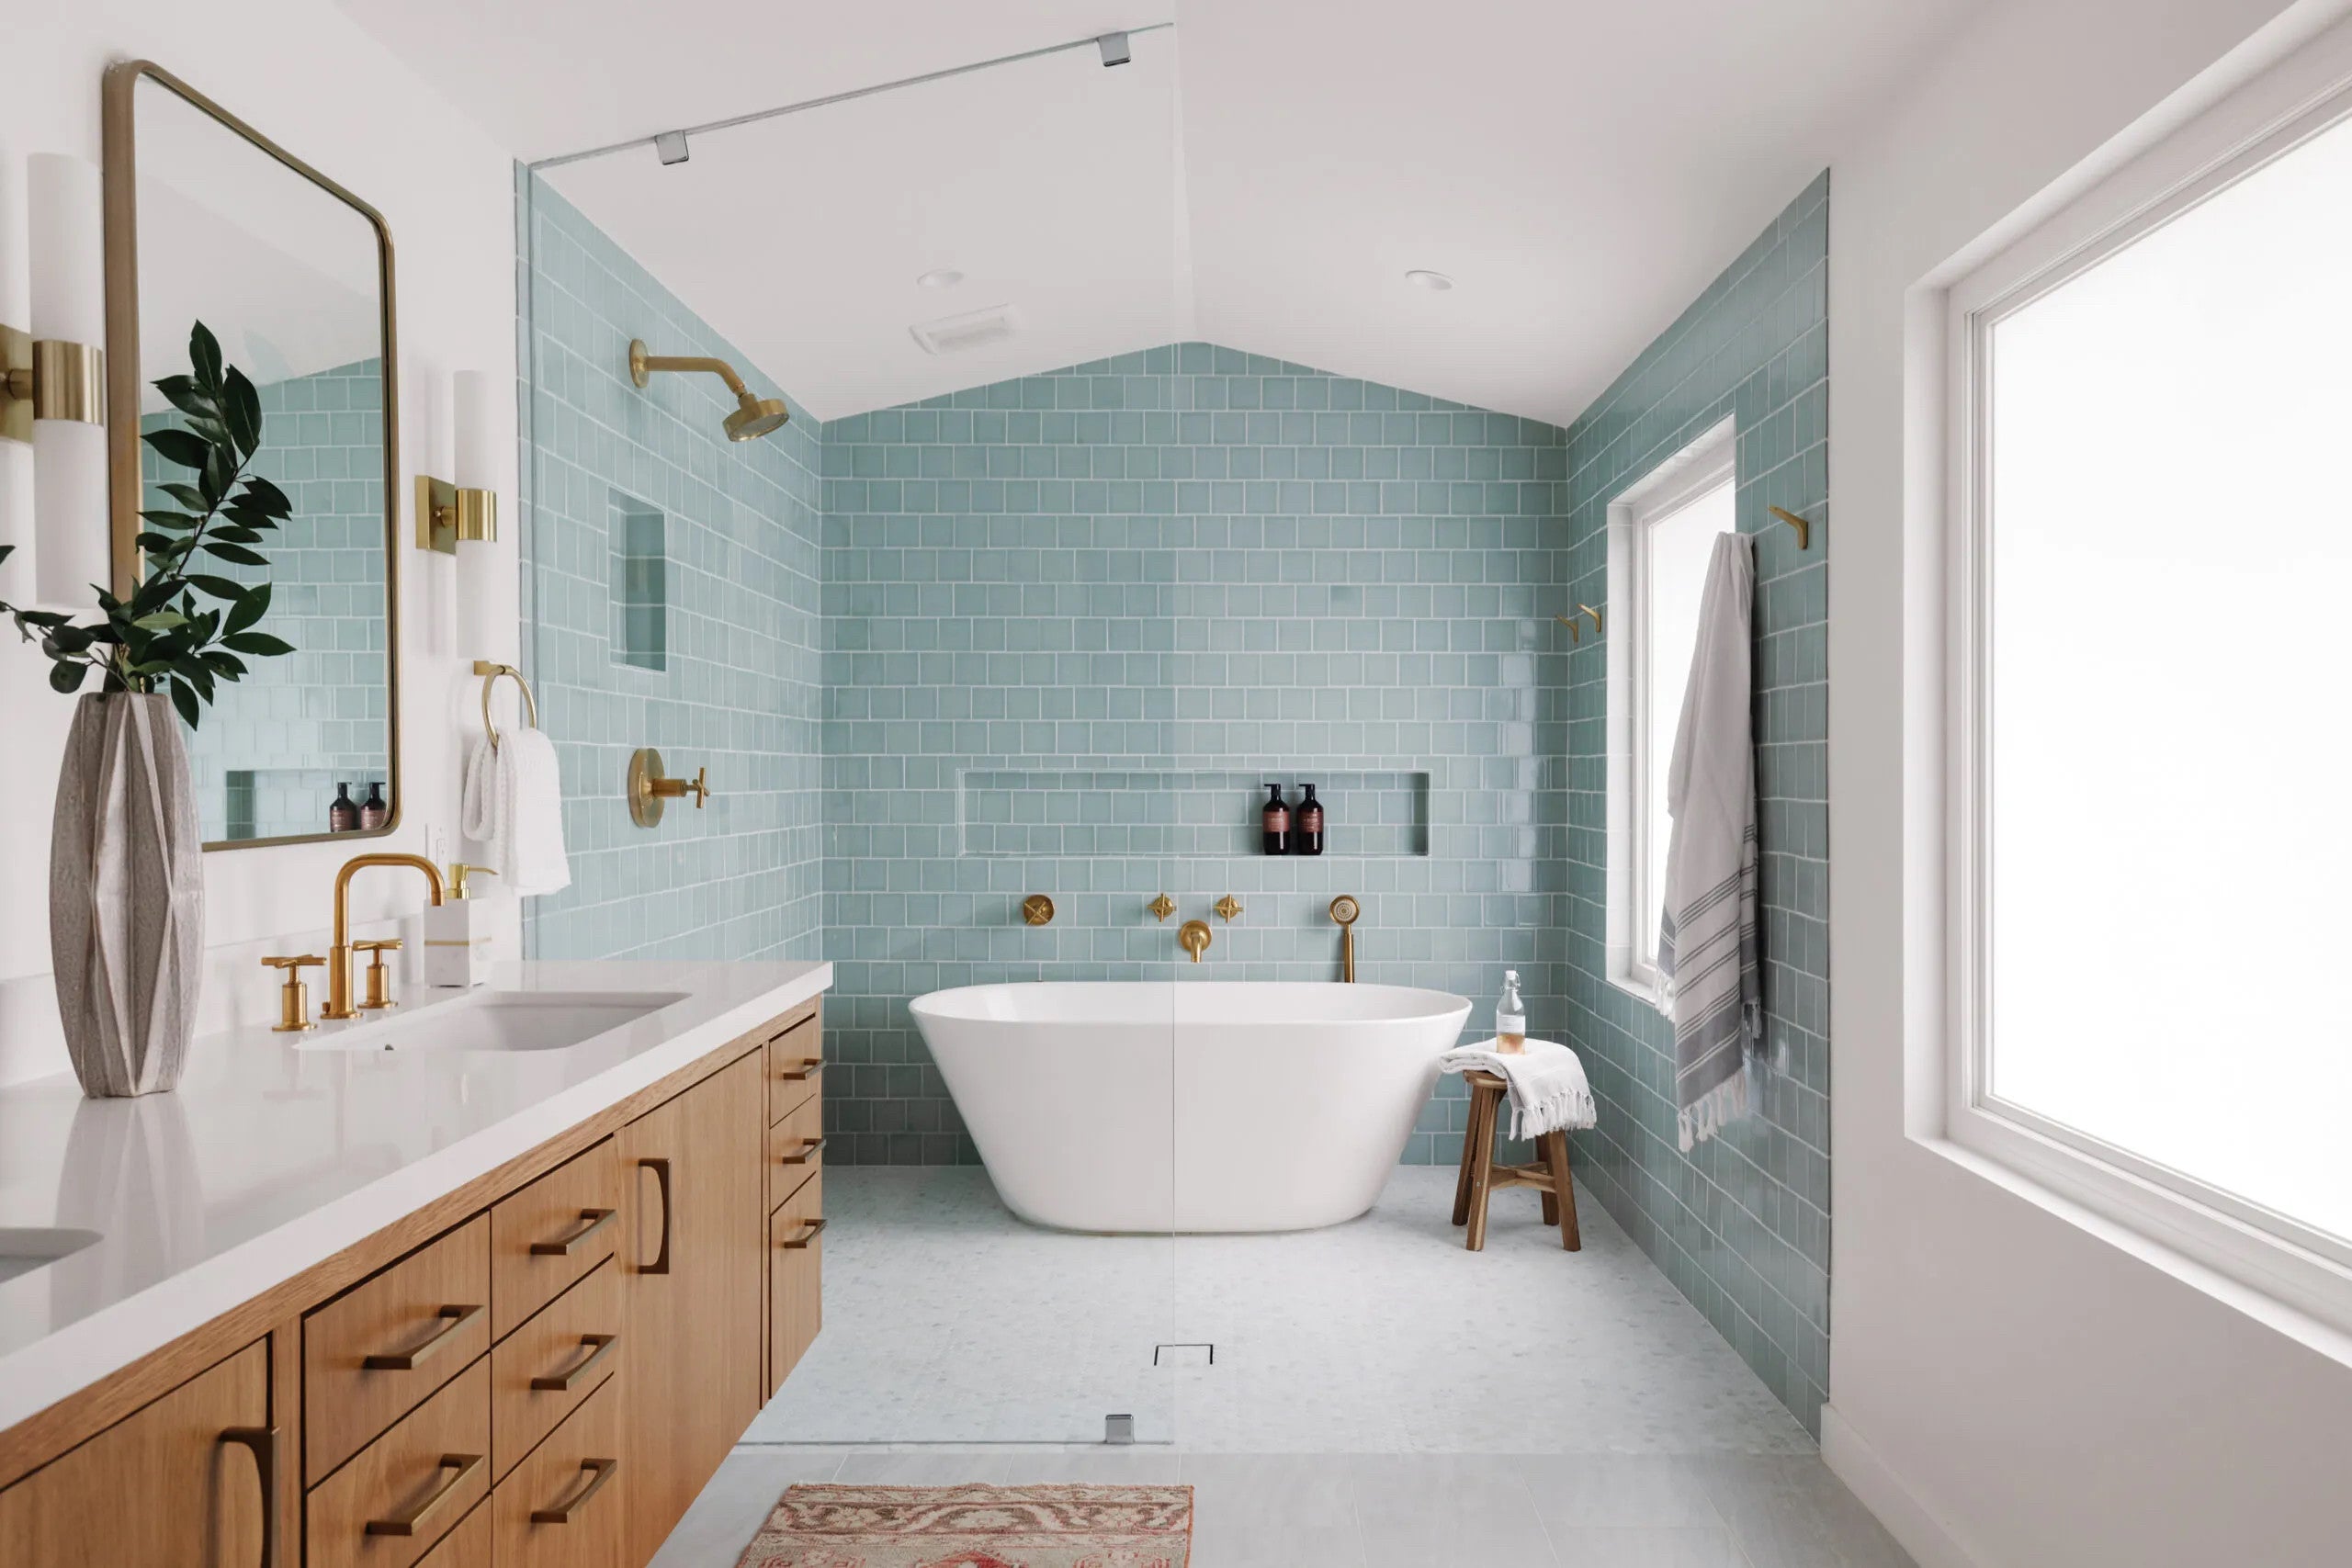 Pros & Cons of Wet Room Bathrooms + How to Make the Most of Yours